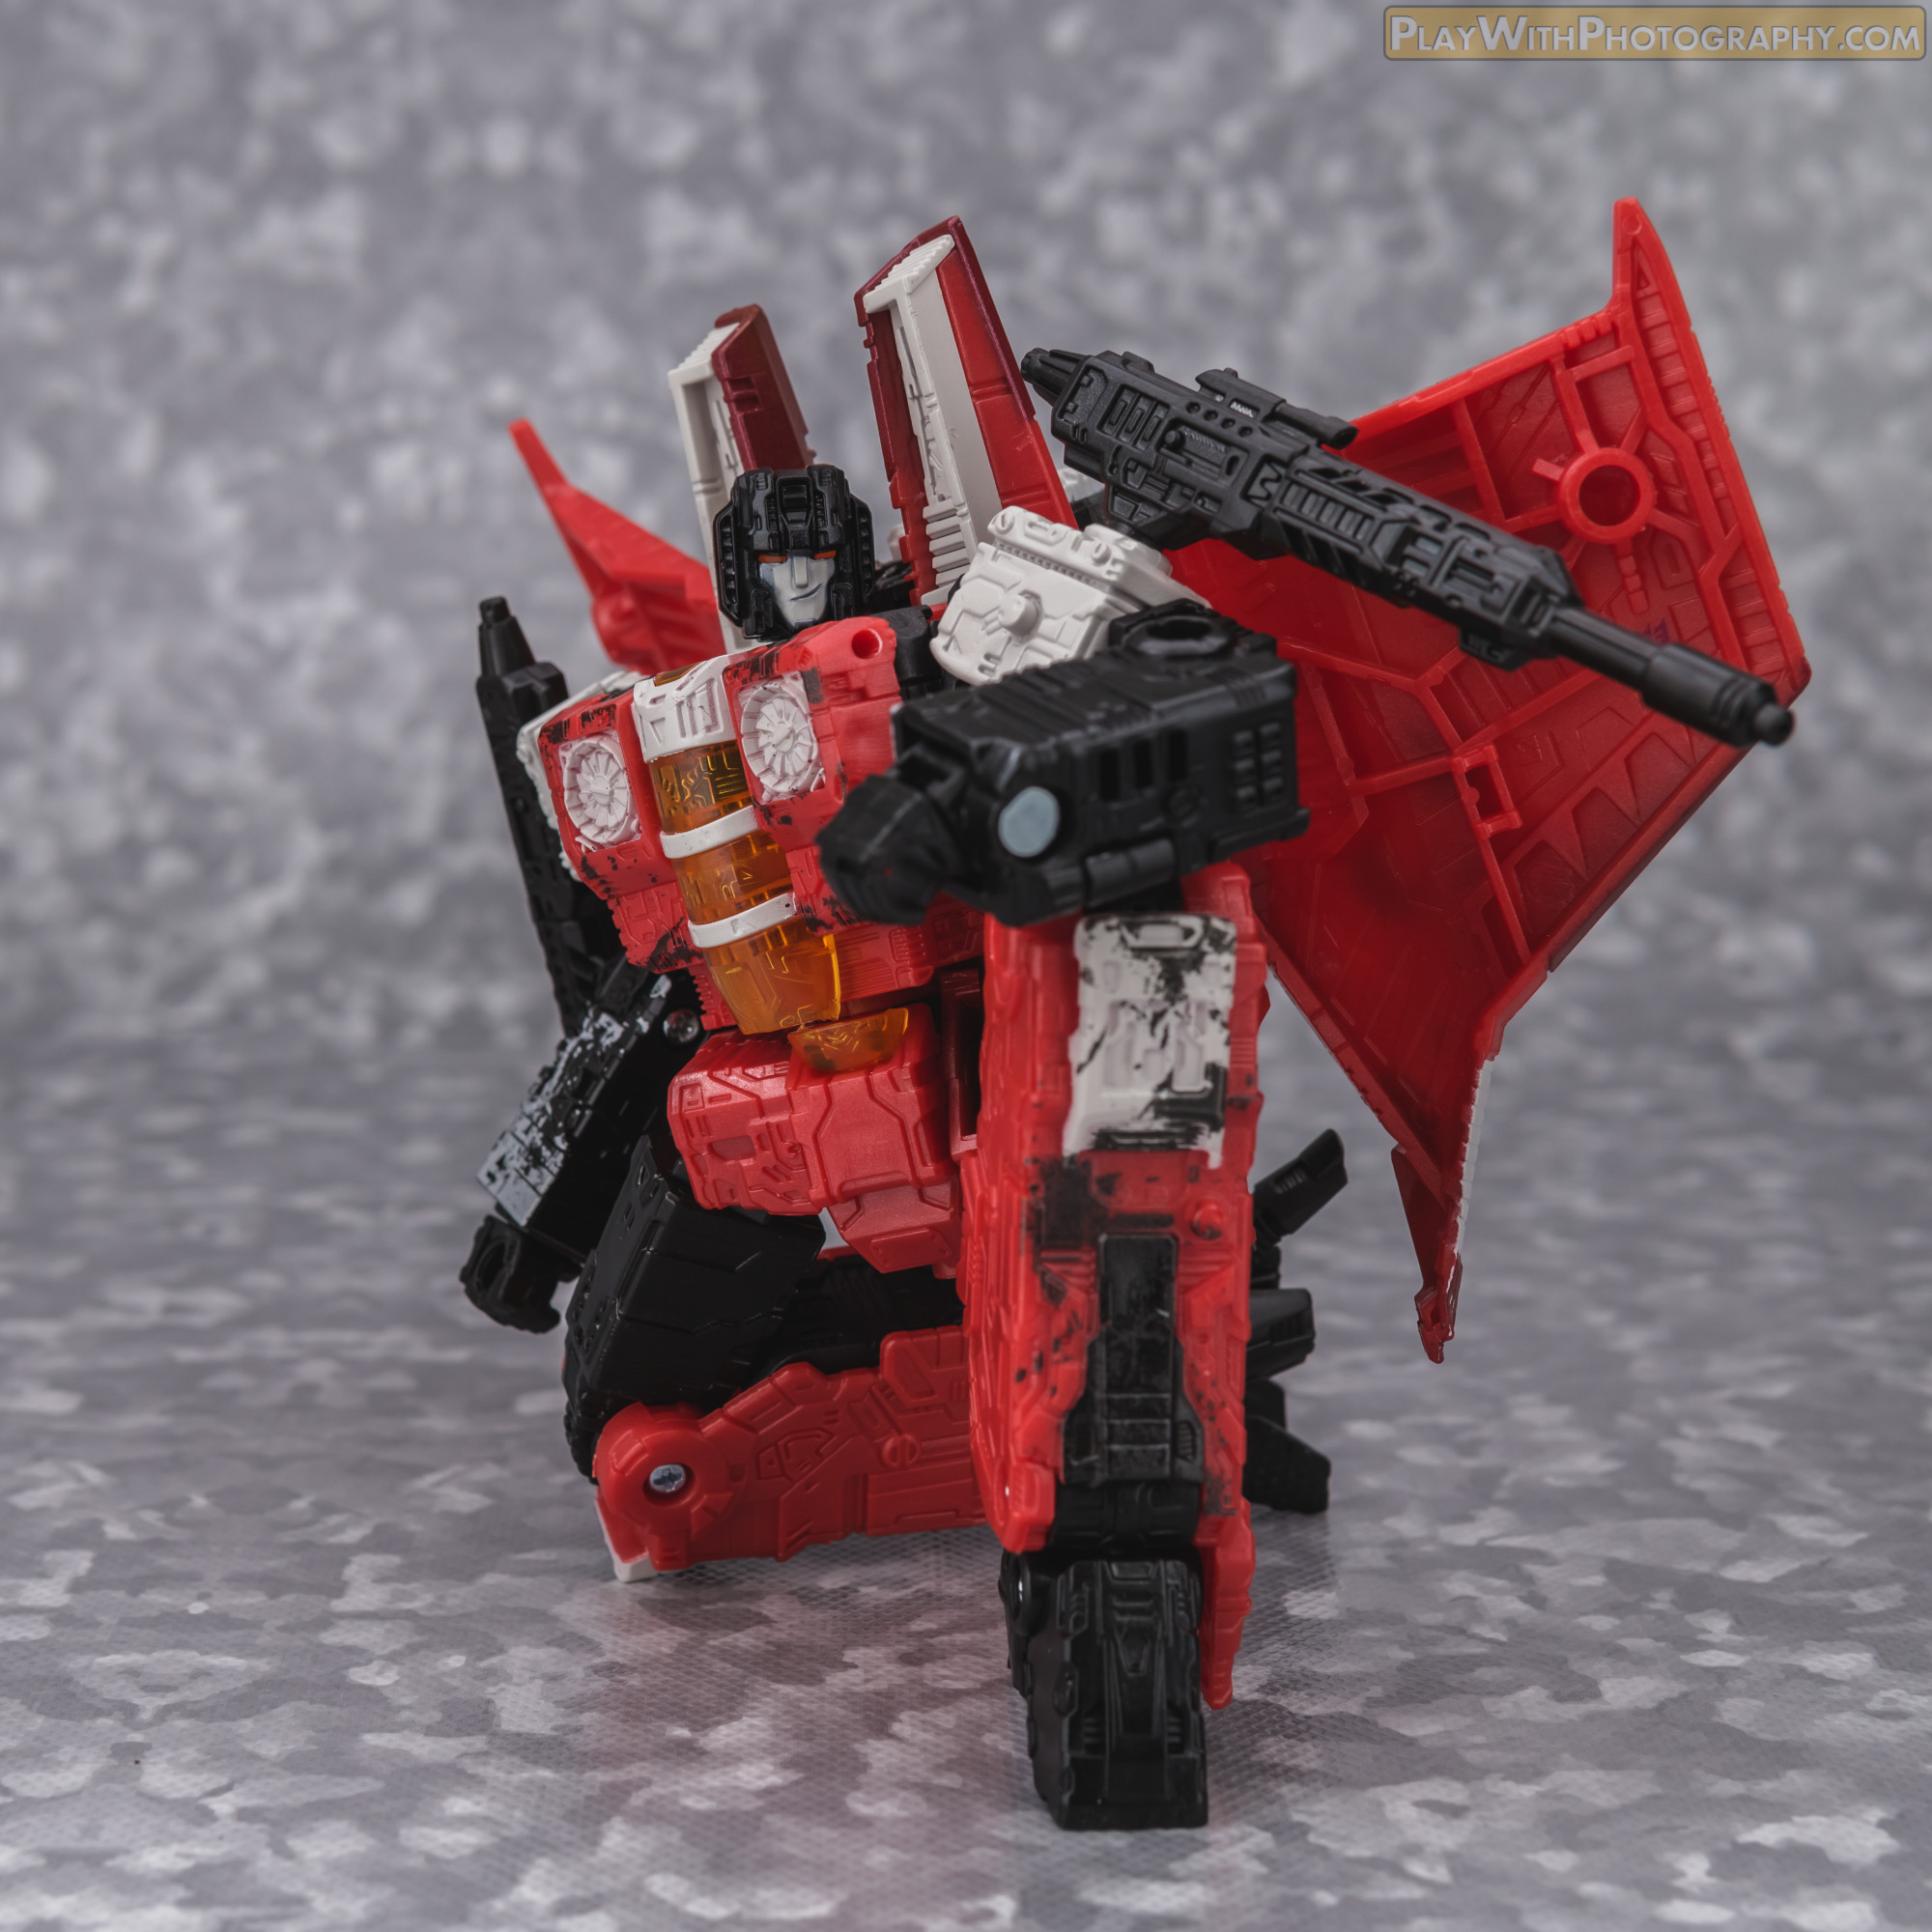 red wing transformers